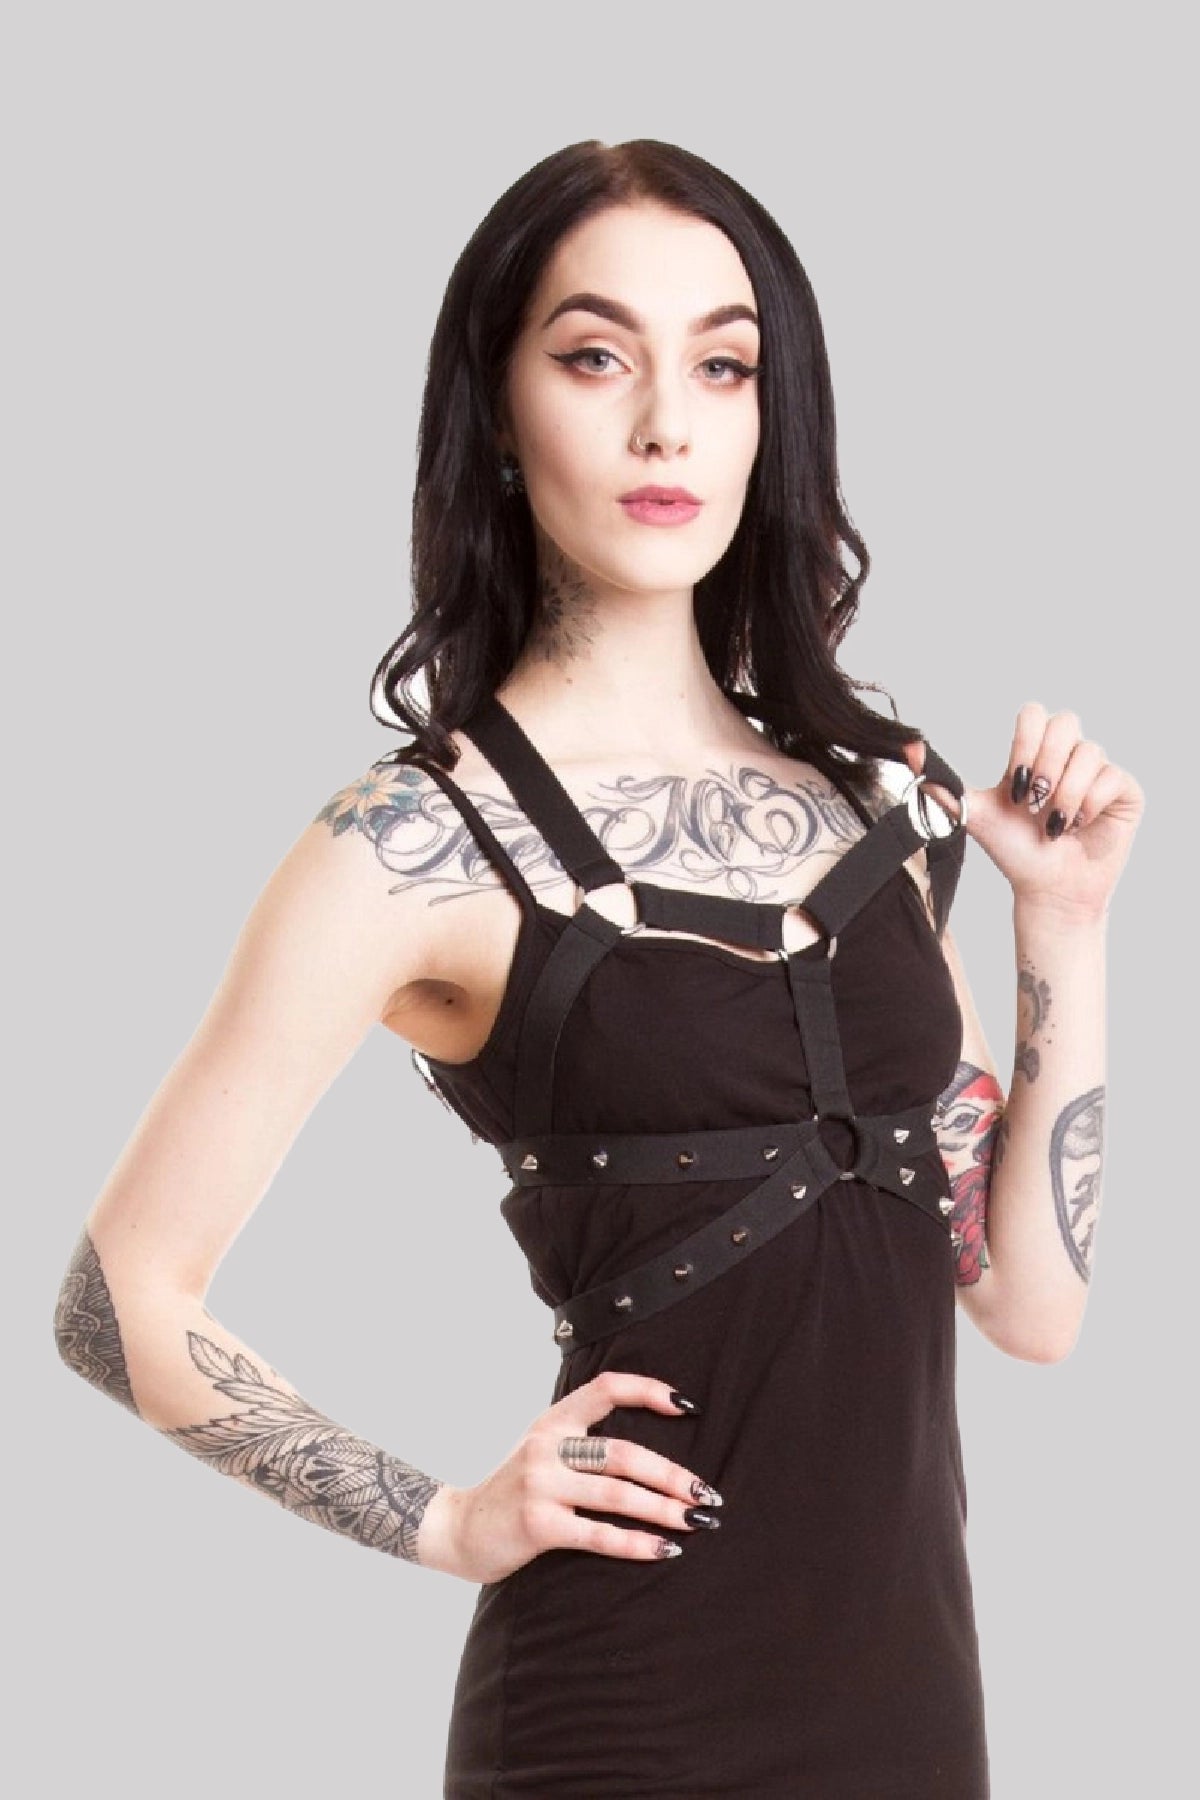 Heartless Gothic Spike Harness